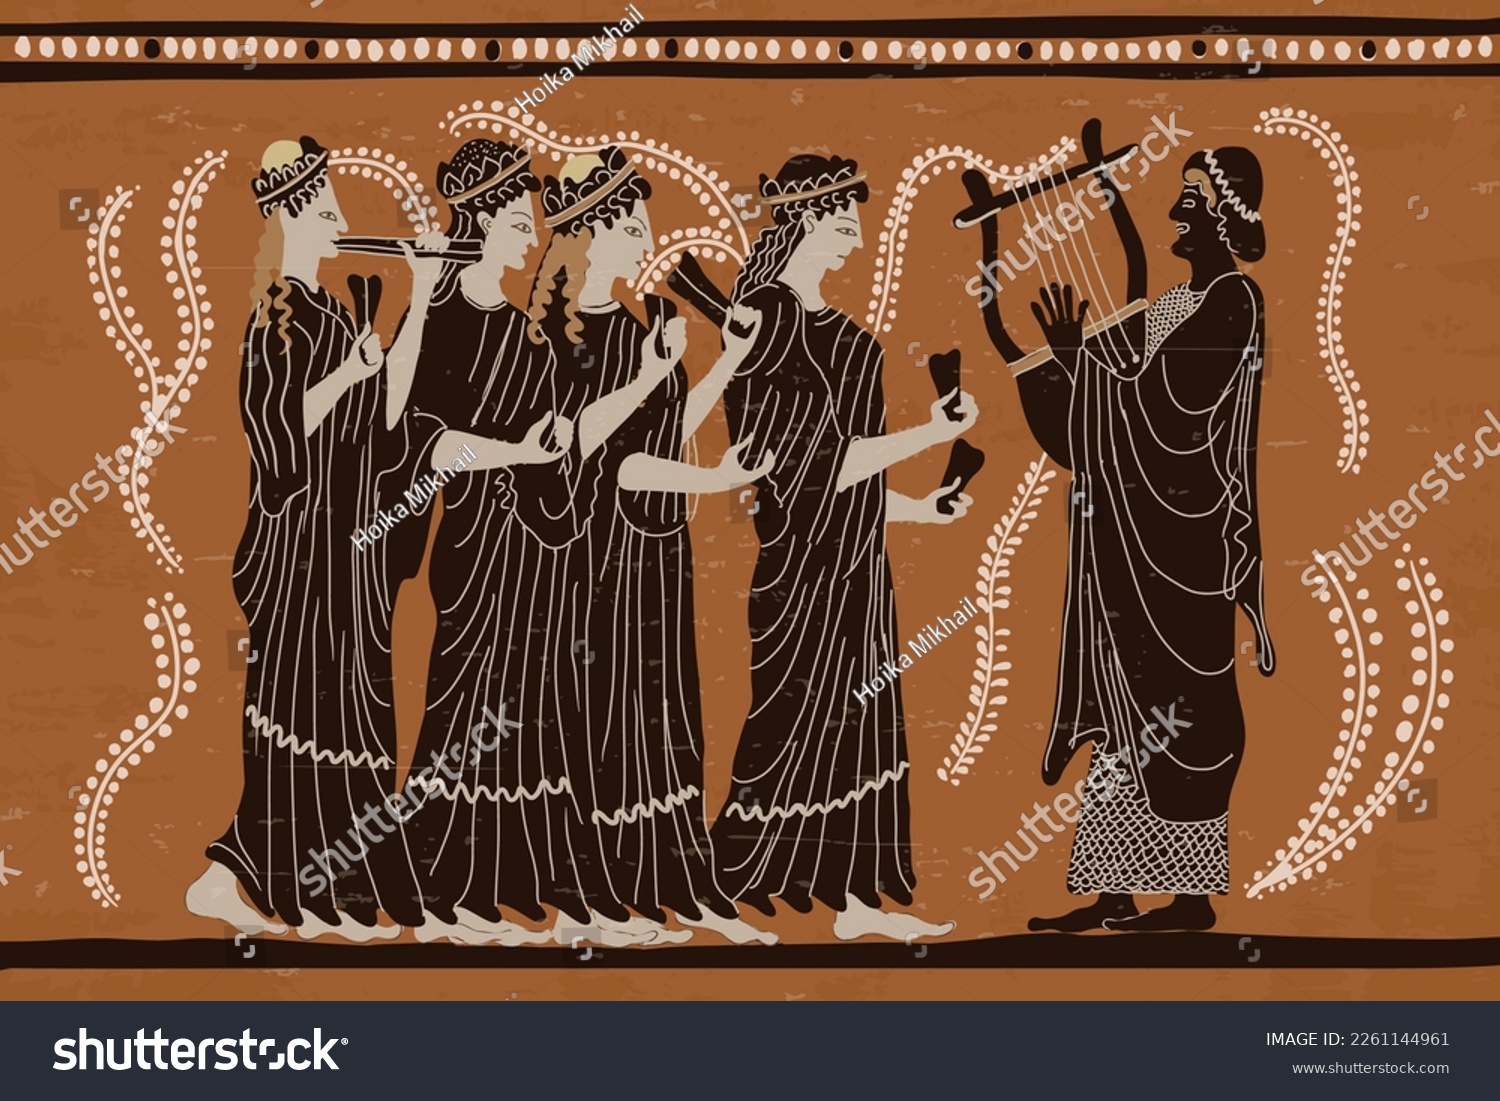 SVG of Ancient Greek painting on dishes. Antique musicians with musical instruments play music svg